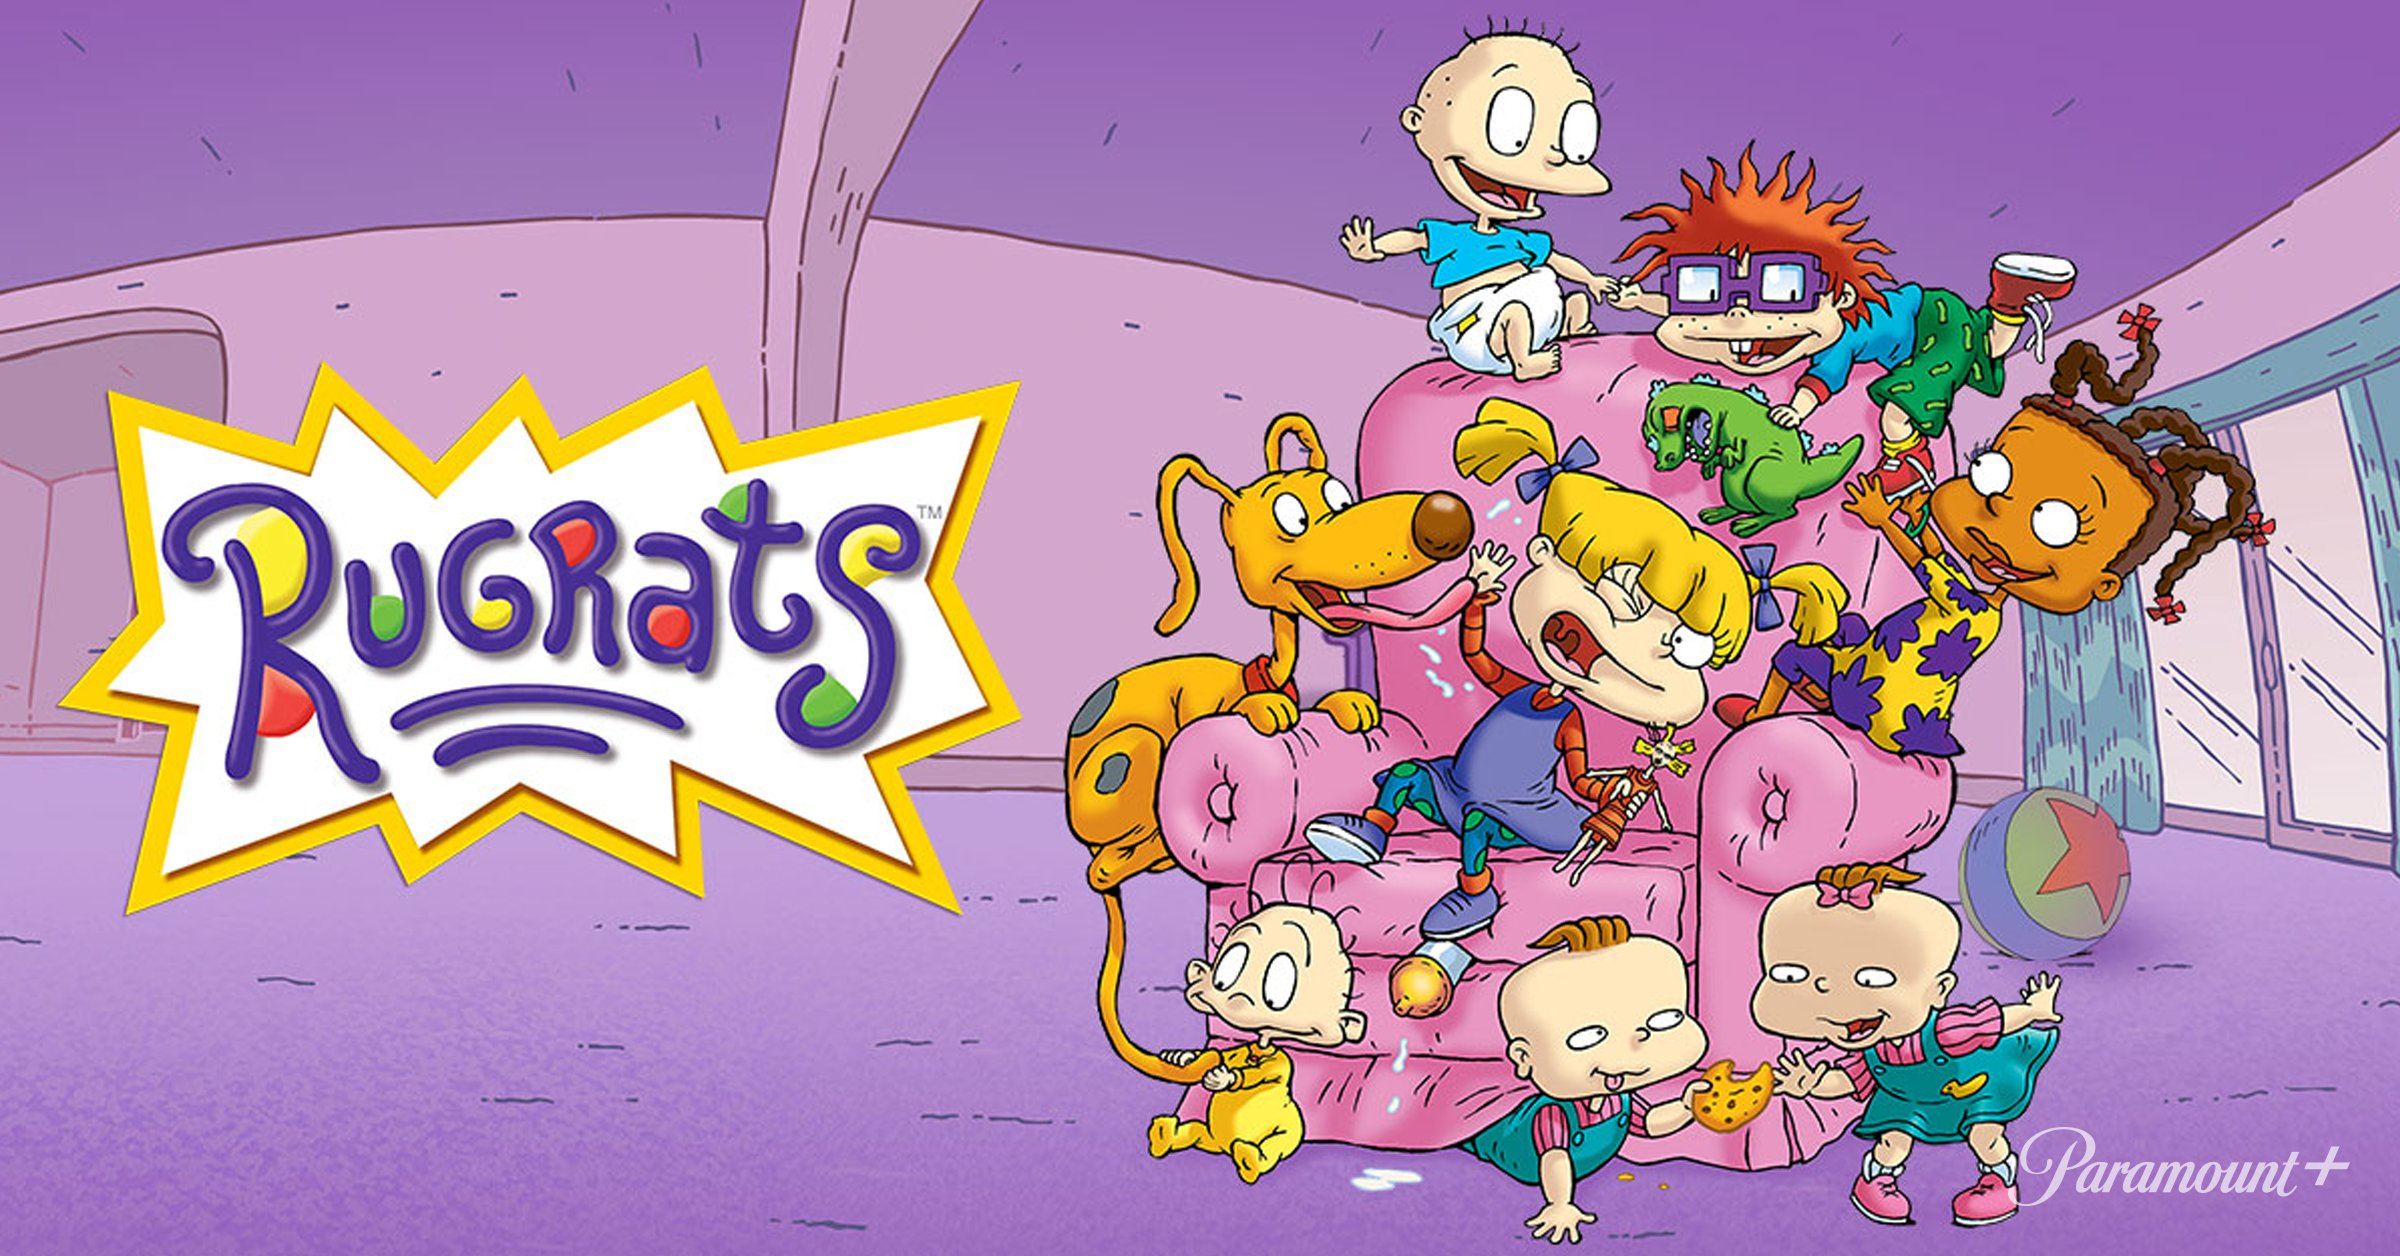 Paramount+ Adds 90s Nickelodeon Shows to Its Content Library